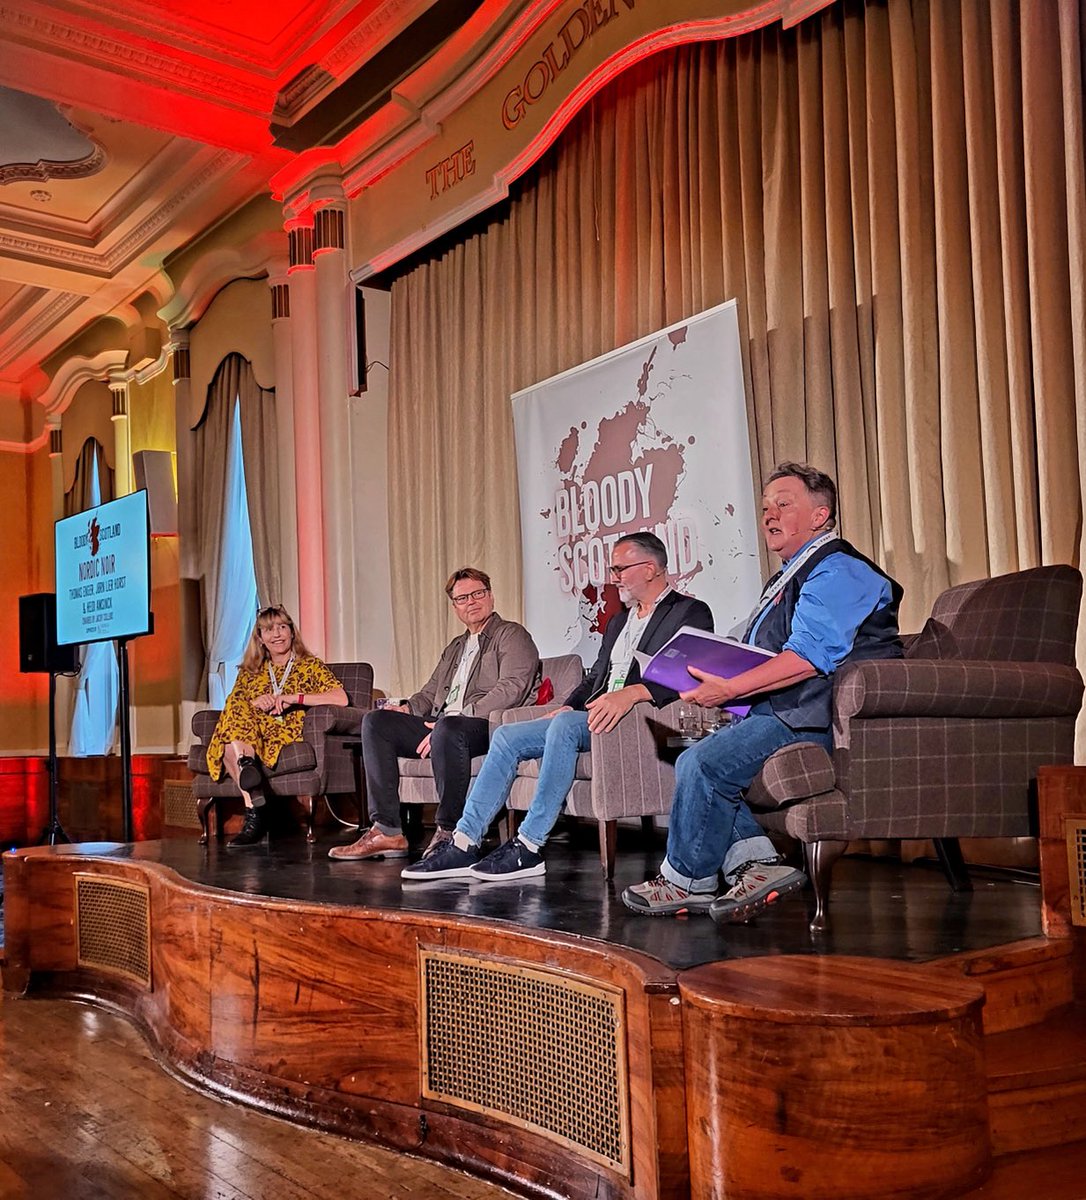 Only slightly starstruck on stage at ⁦@BloodyScotland in Stirling with Norwegian crimewriting power duo ⁦@EngerThomas⁩ and ⁦@LierHorst⁩, interviewed by the wonderful ⁦@CollinsJacky⁩. Really fun panel, loved it 🏴󠁧󠁢󠁳󠁣󠁴󠁿🇩🇰🇳🇴❤️ #bloodyscotland #nordicnoir